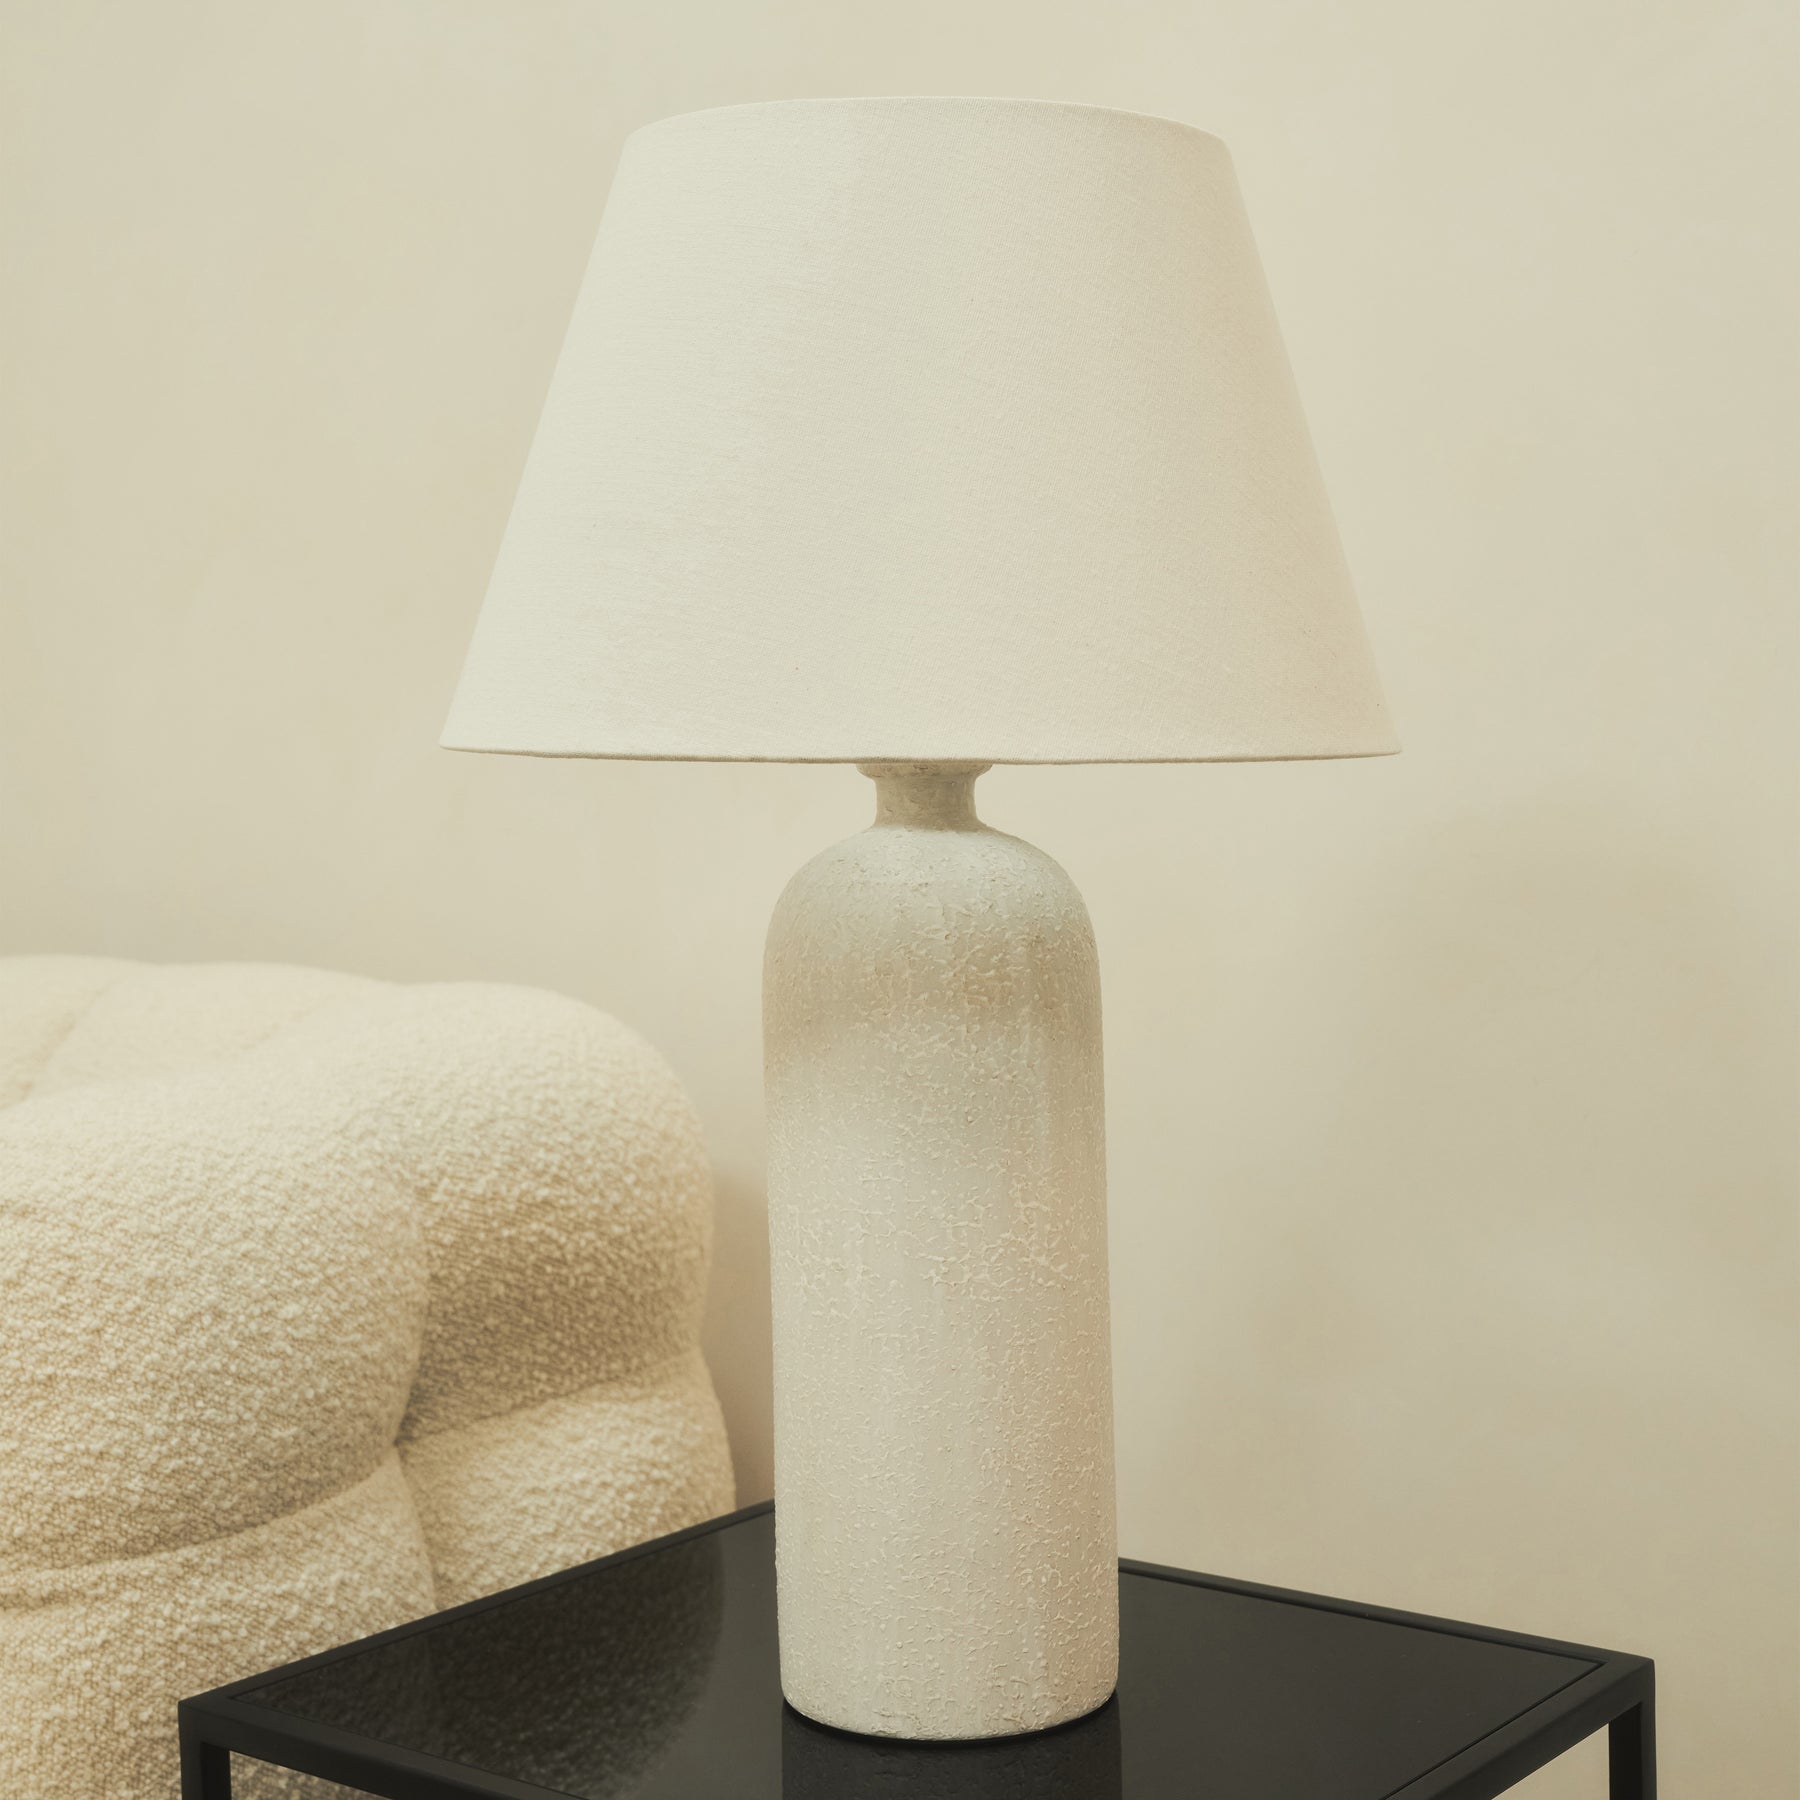 Textured Ceramic Based Table Lamp Natural Shade on brooklyn table